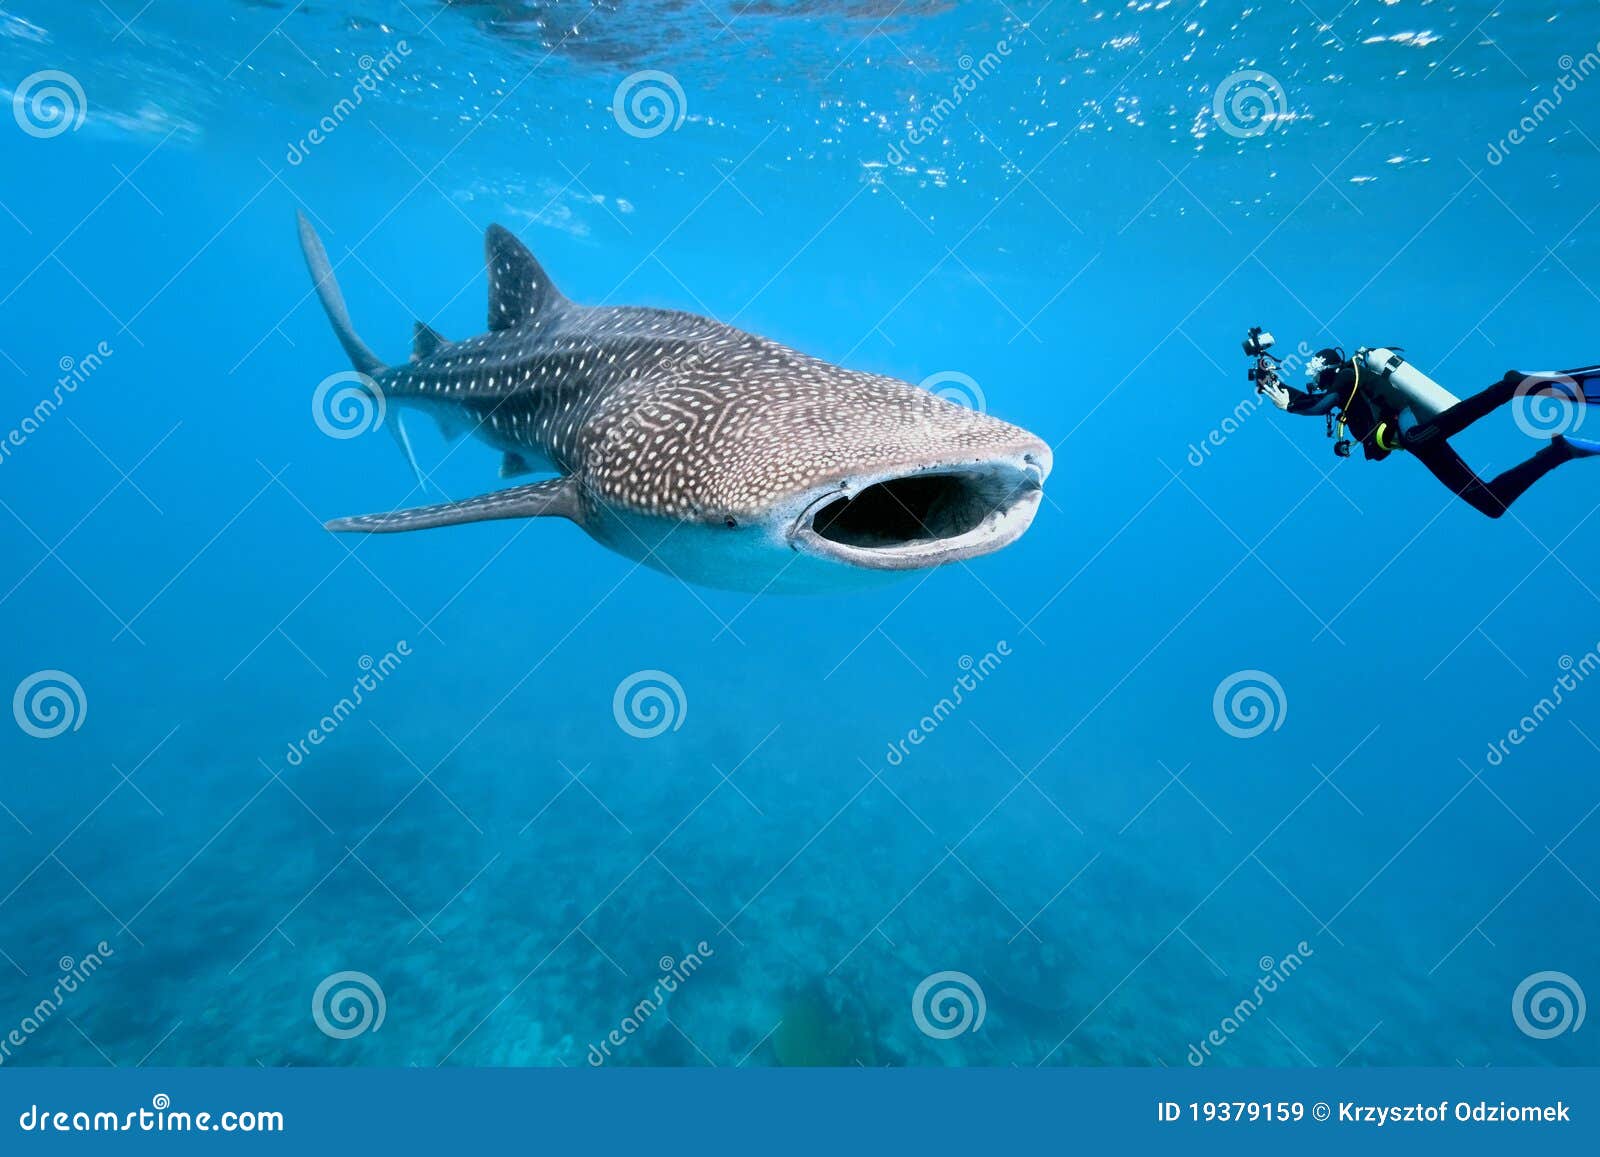 whale shark and underwater photographer